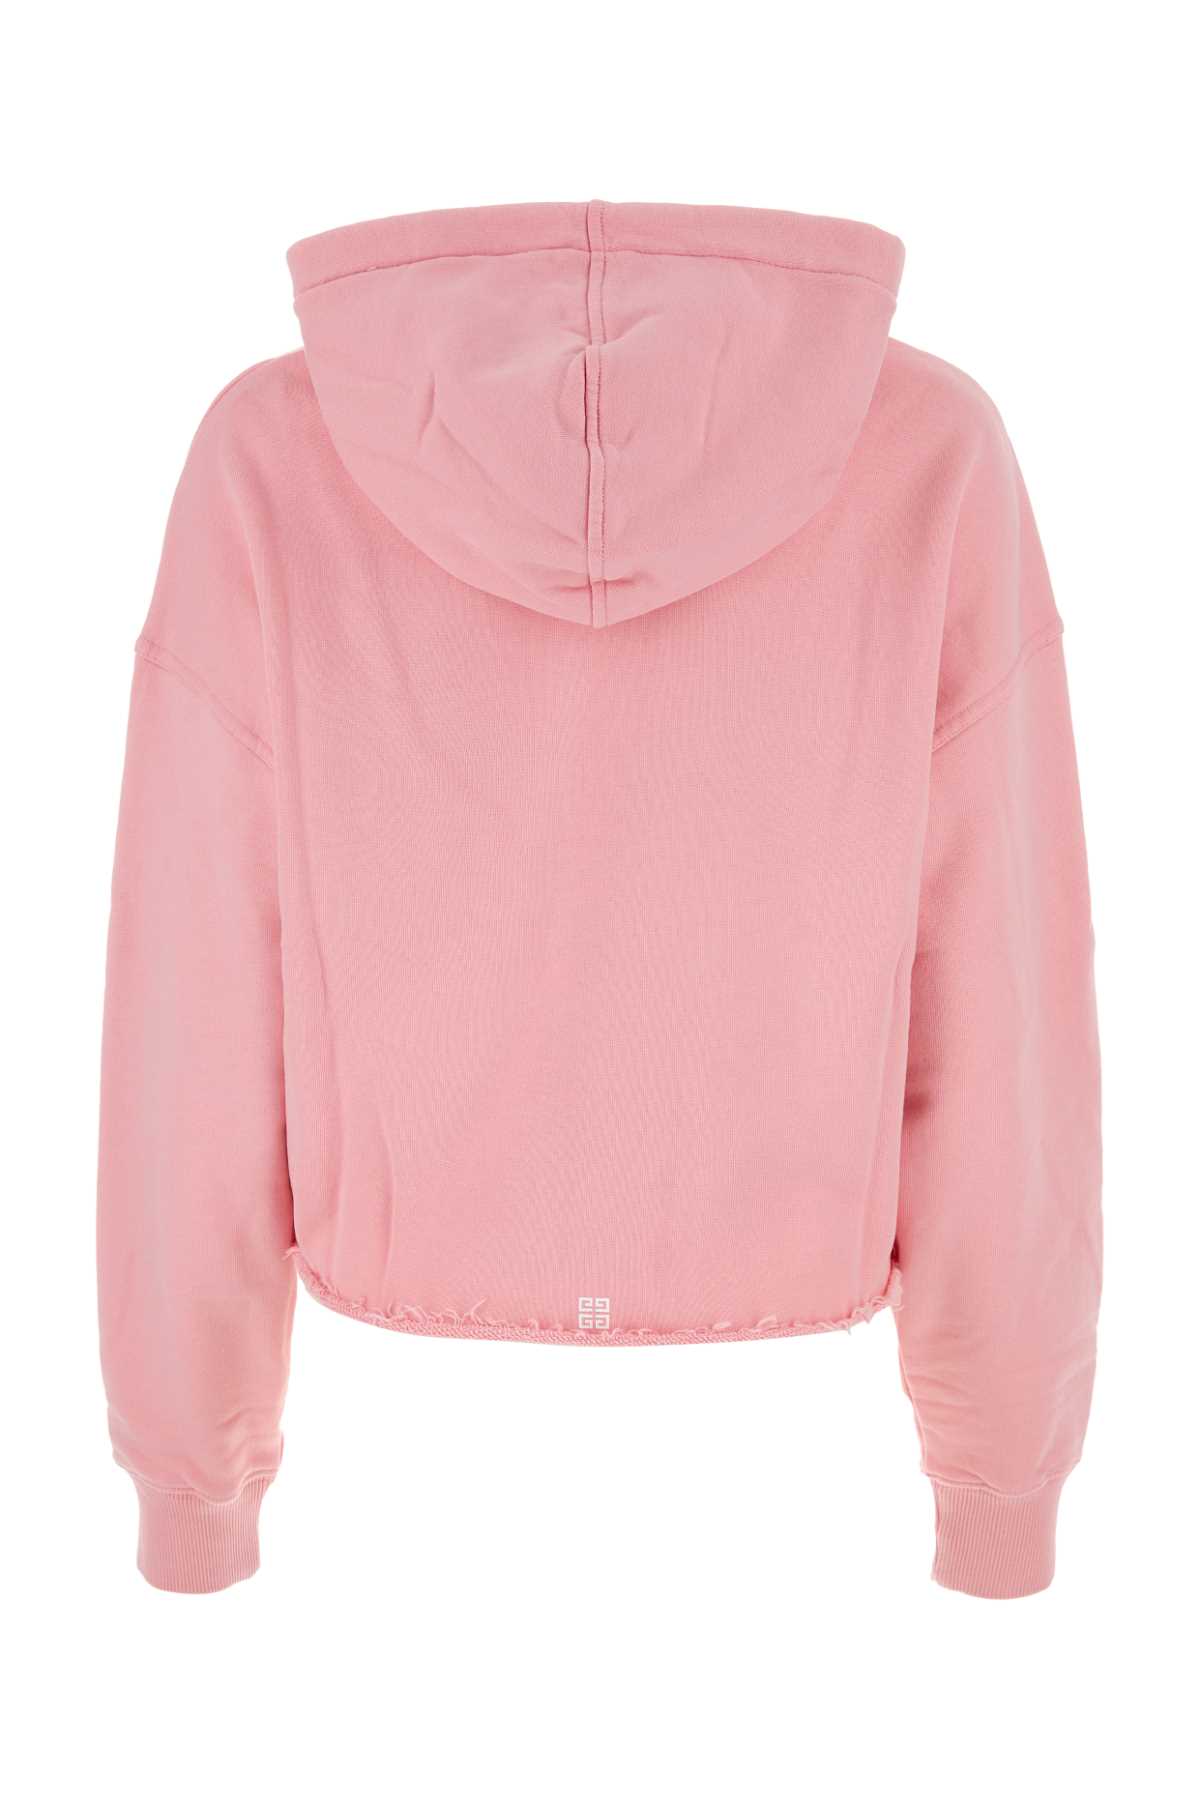 Givenchy Pink Cotton Sweatshirt In Flamingo